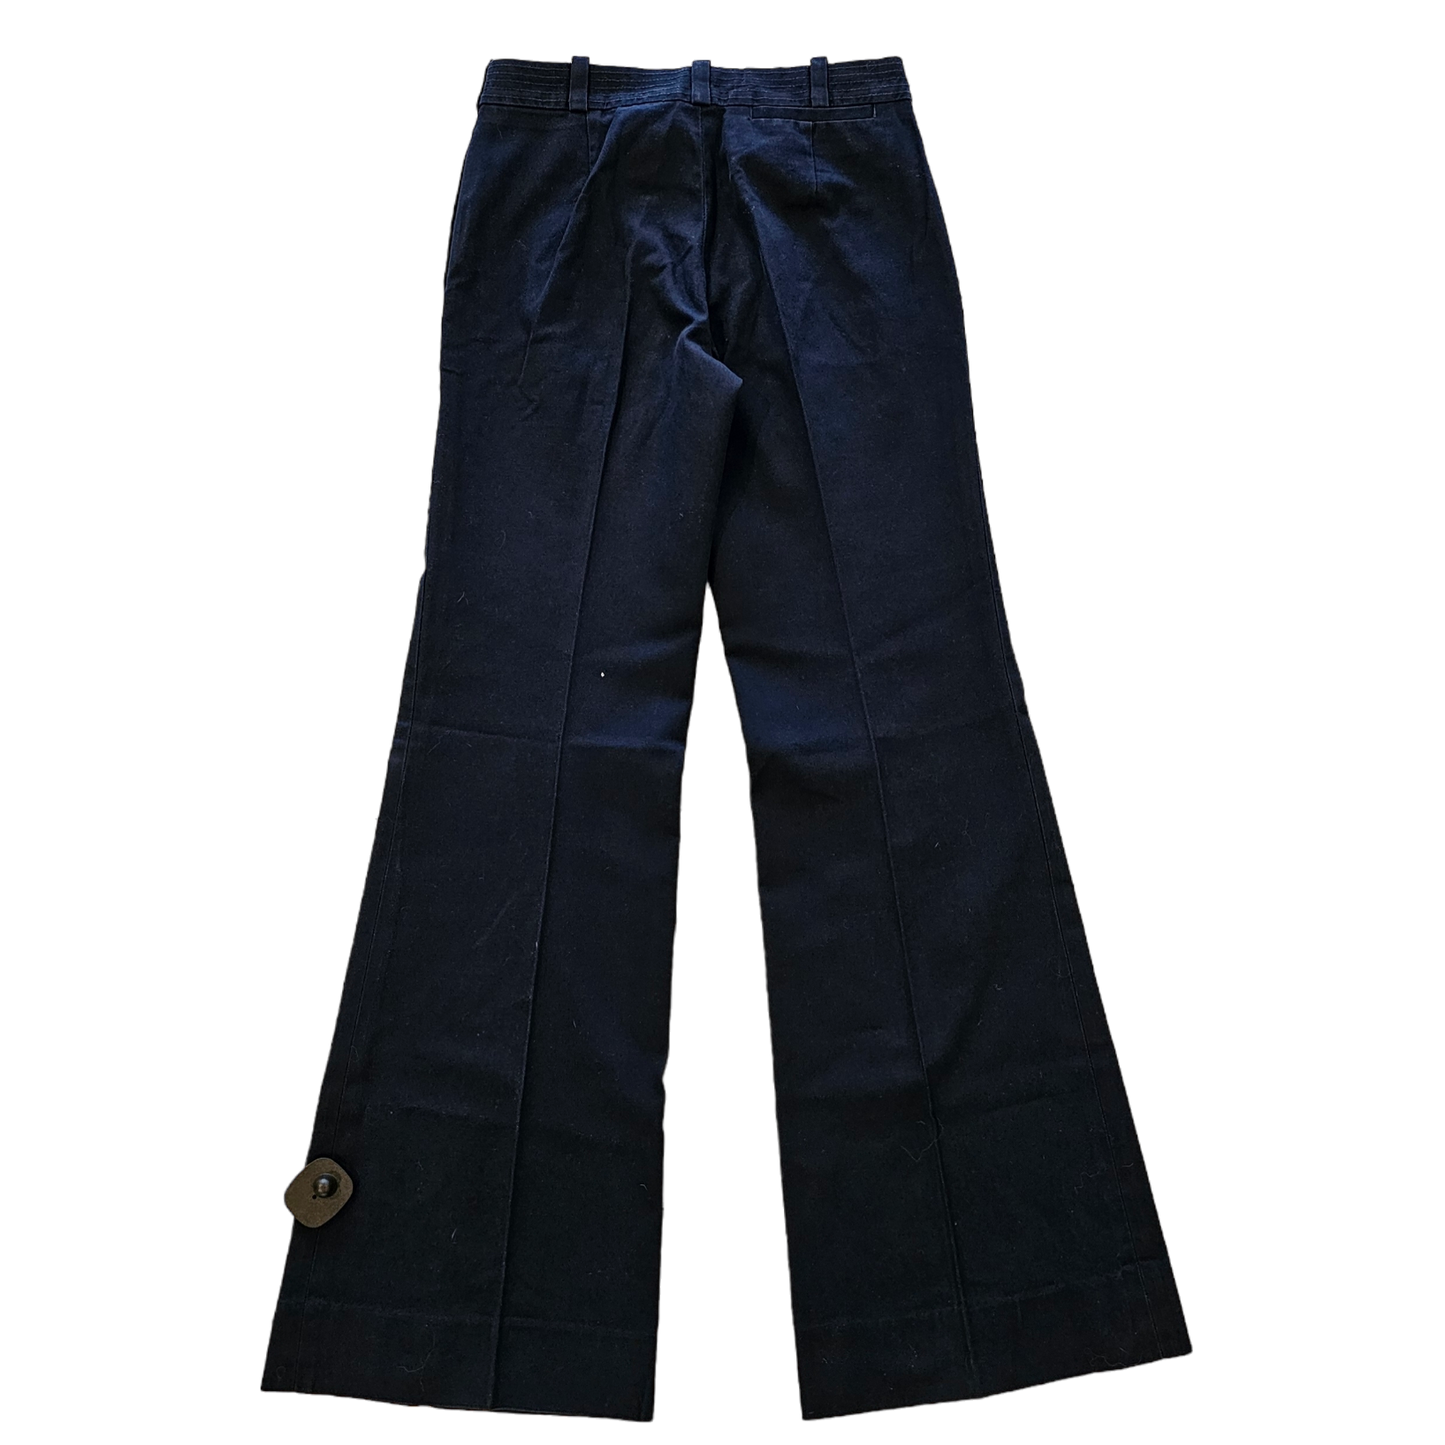 Pants Designer By Tory Burch  Size: 4